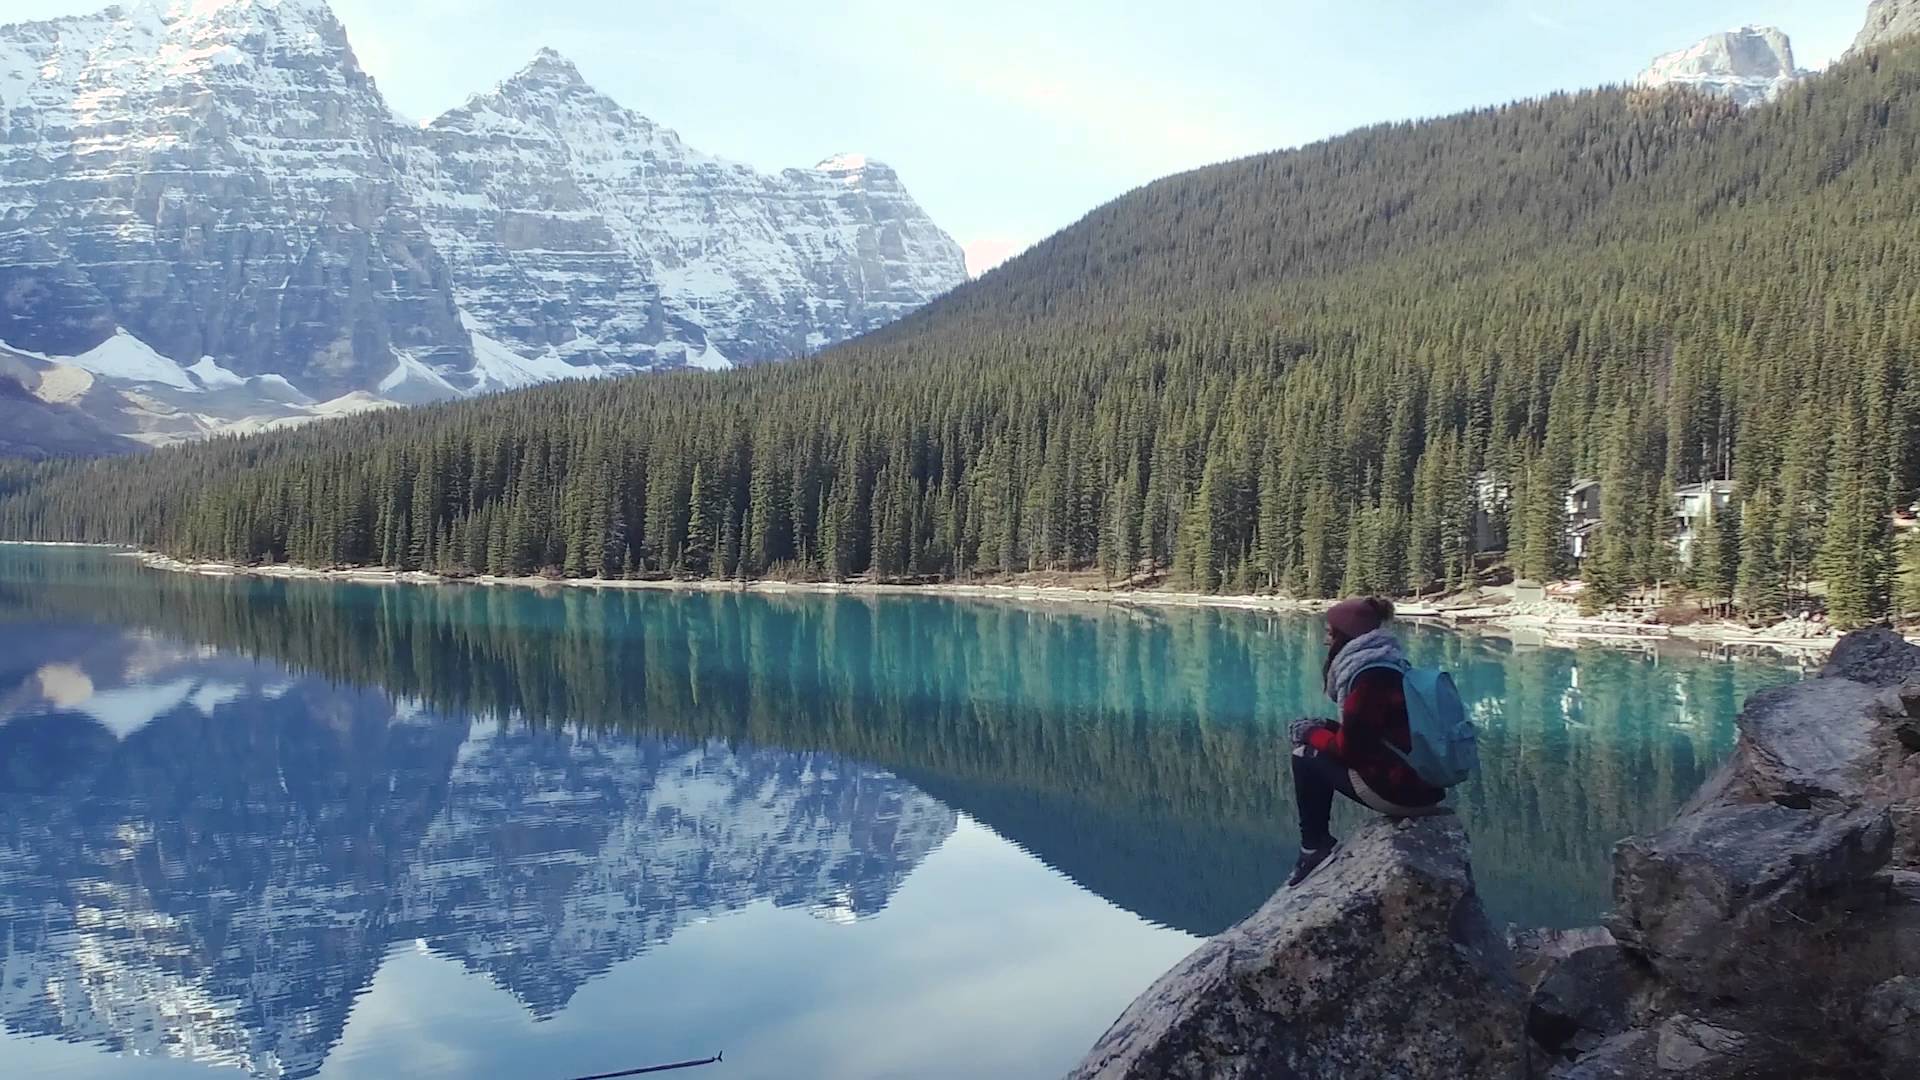 DJI - The Sound of Nature from Rocky Mountains - YouTube